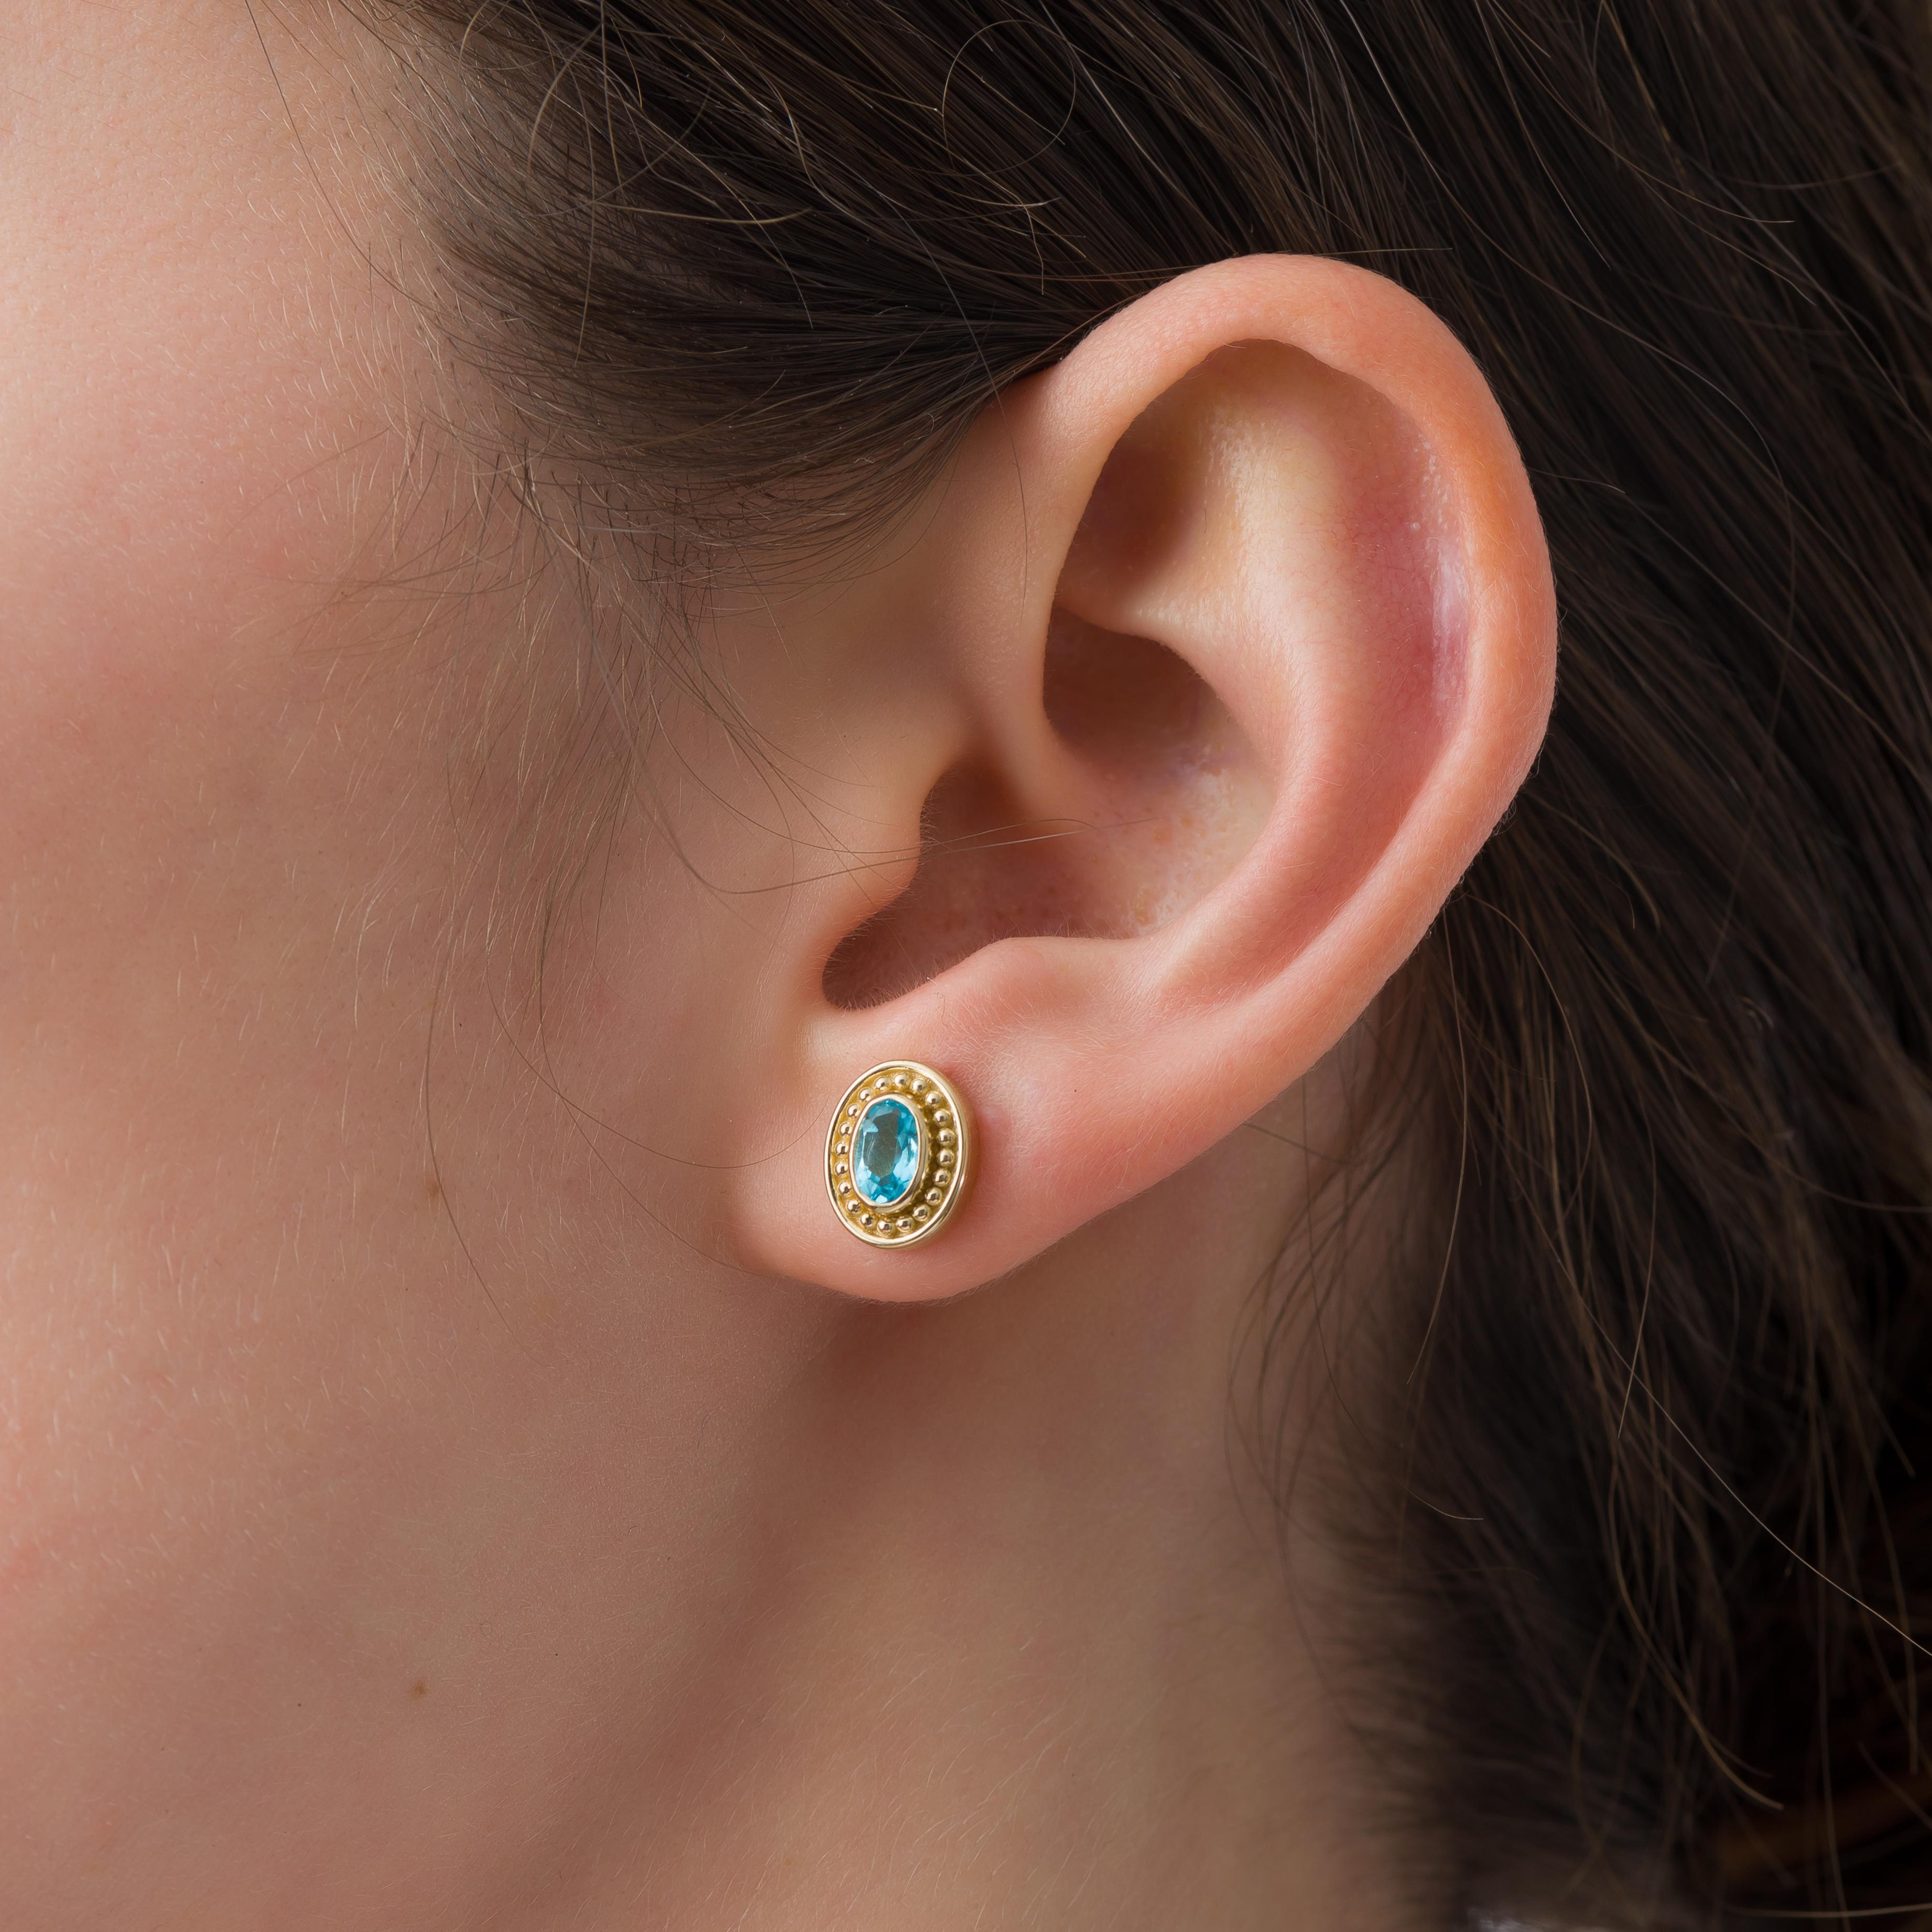 Adorn your ears with our gold earrings, featuring an oval Swiss topaz, inspired by the grandeur of the Byzantine era—a testament to enduring beauty and classic craftsmanship.

100% handmade in our workshop.

Metal: 18K Gold
Gemstones: Swiss Blue